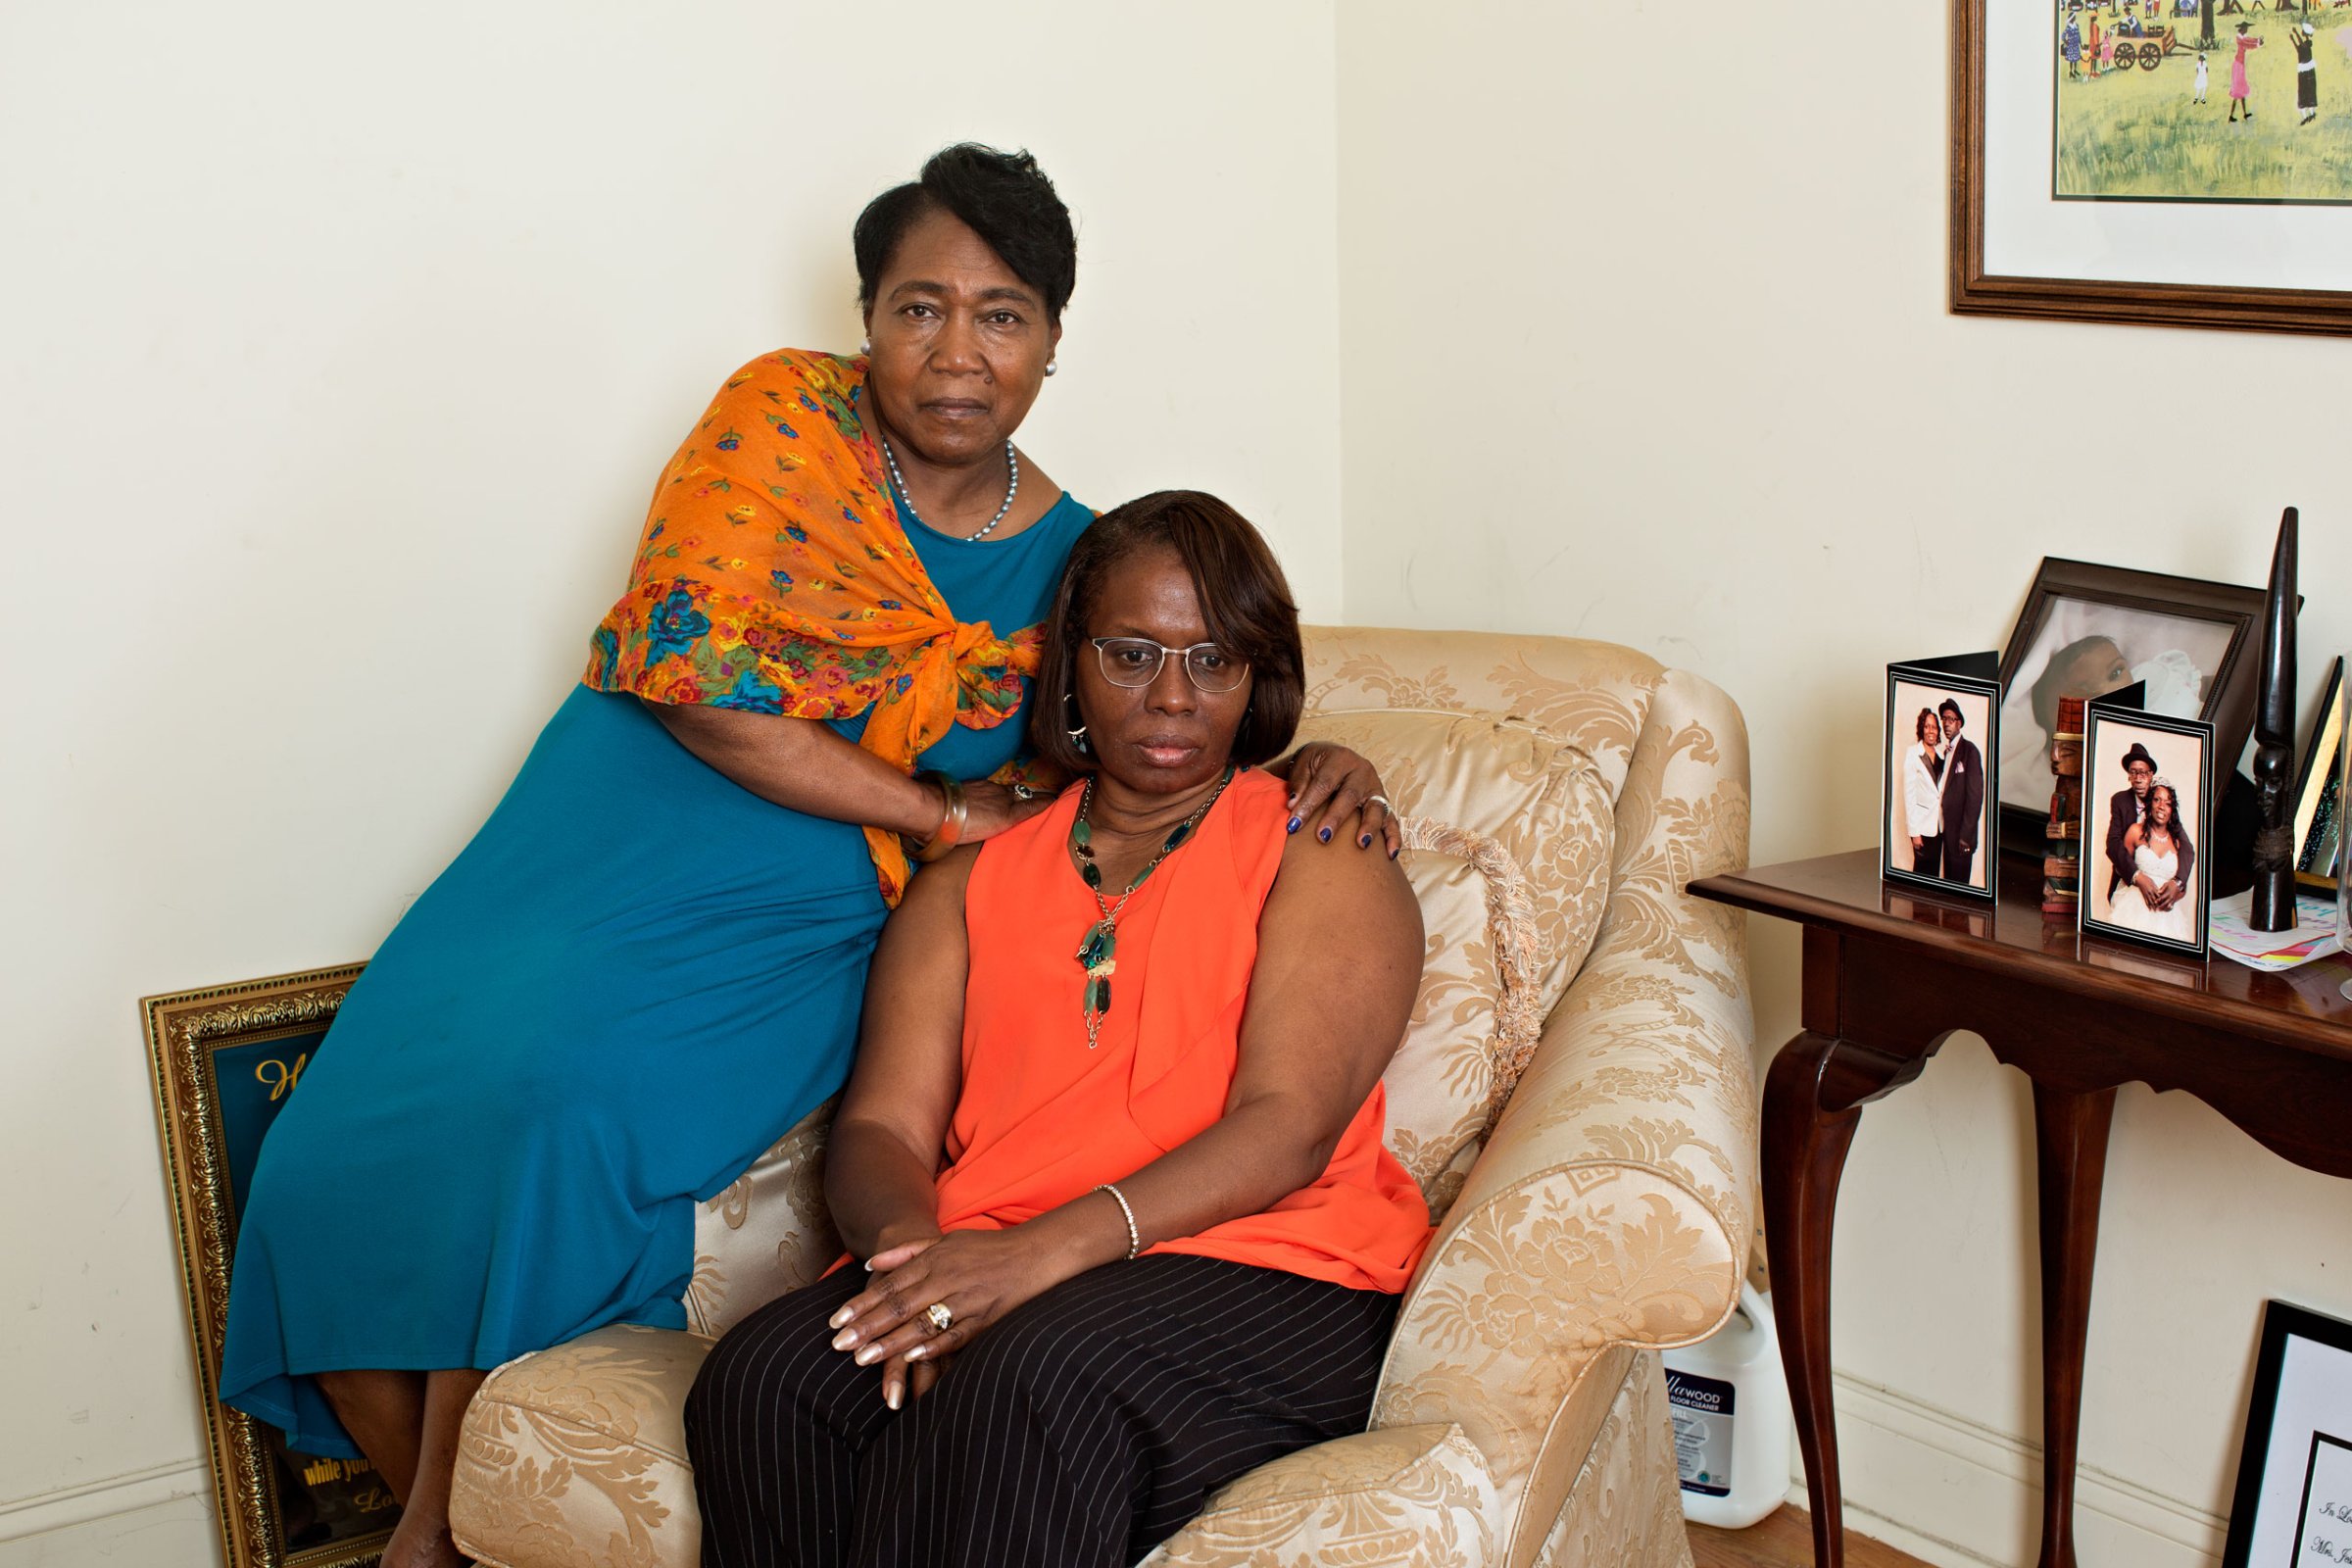 Polly Sheppard, left, and Felicia Sanders The longtime friends, seen at Sanders’ Charleston home, both survived the massacre. The killer spared Sheppard at gunpoint so she would tell what happened